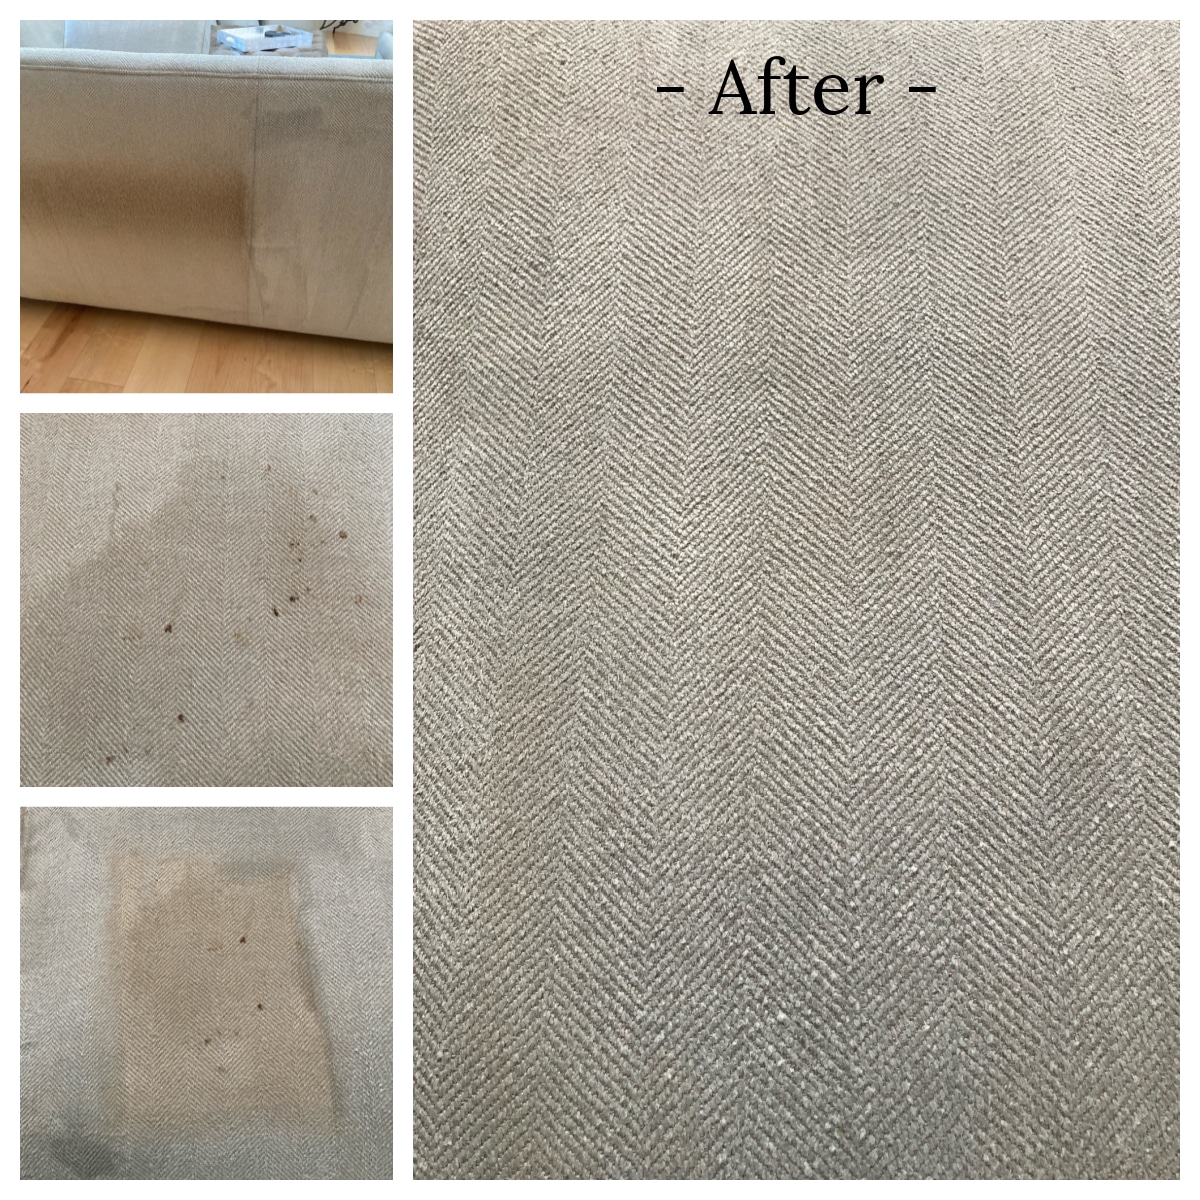 fabric sofa cleaning in Scottsdale